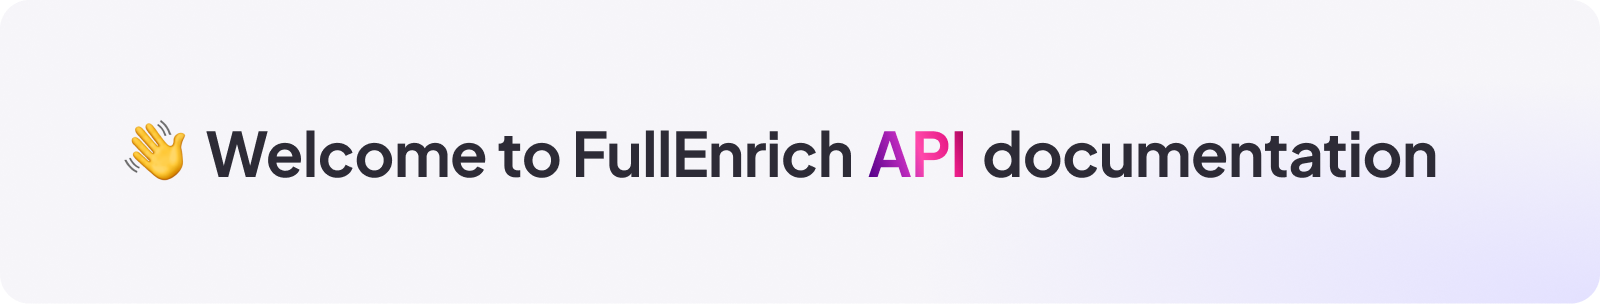 Welcome to FullEnrich API documentation